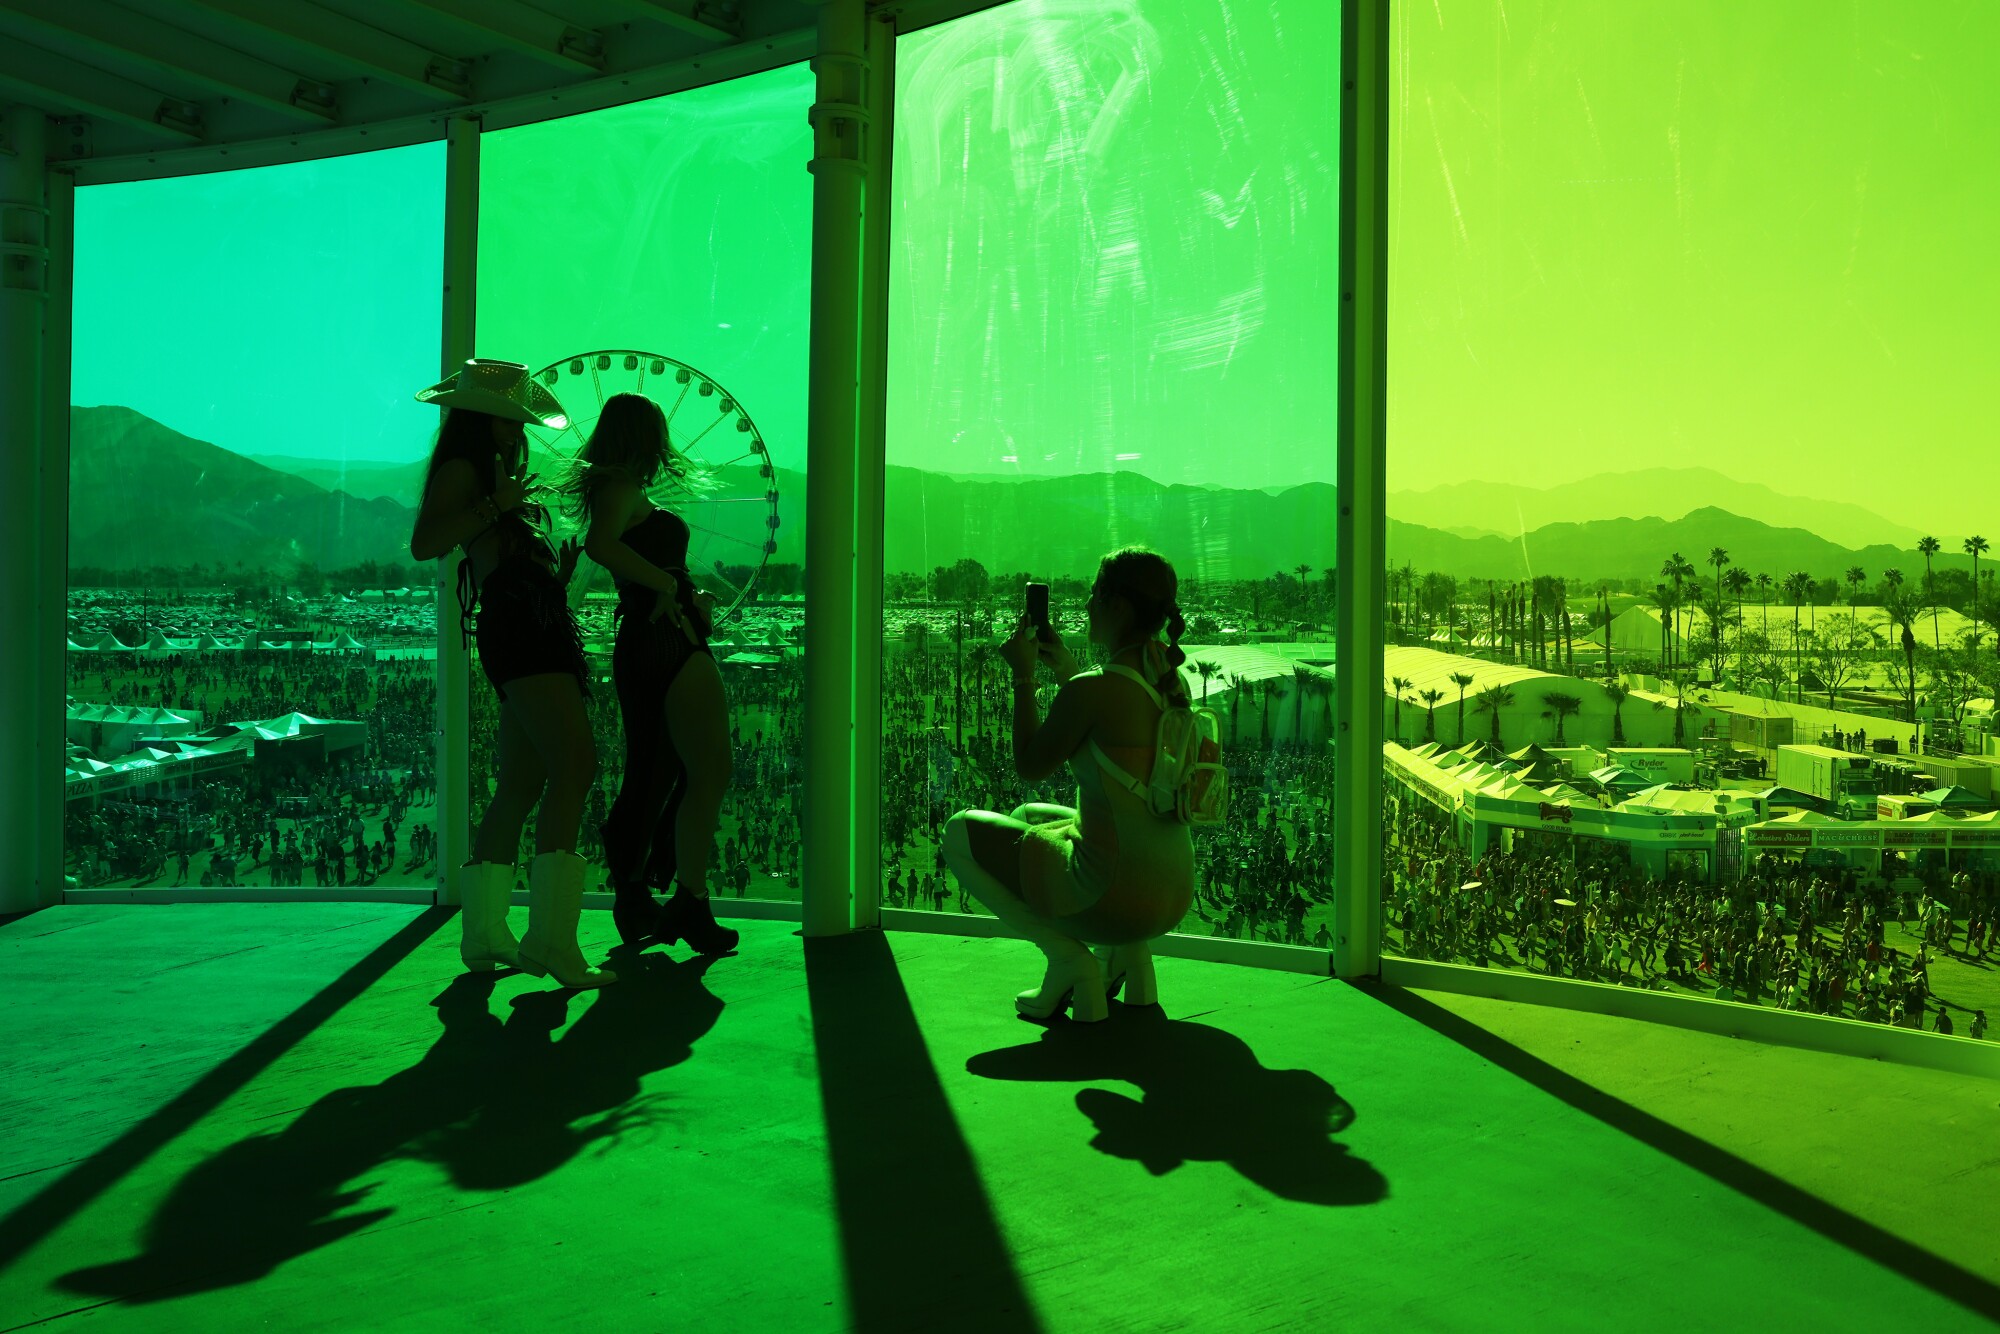 A woman takes pictures of two other women in a green-glass enclosed building overlooking the crowded grounds below.